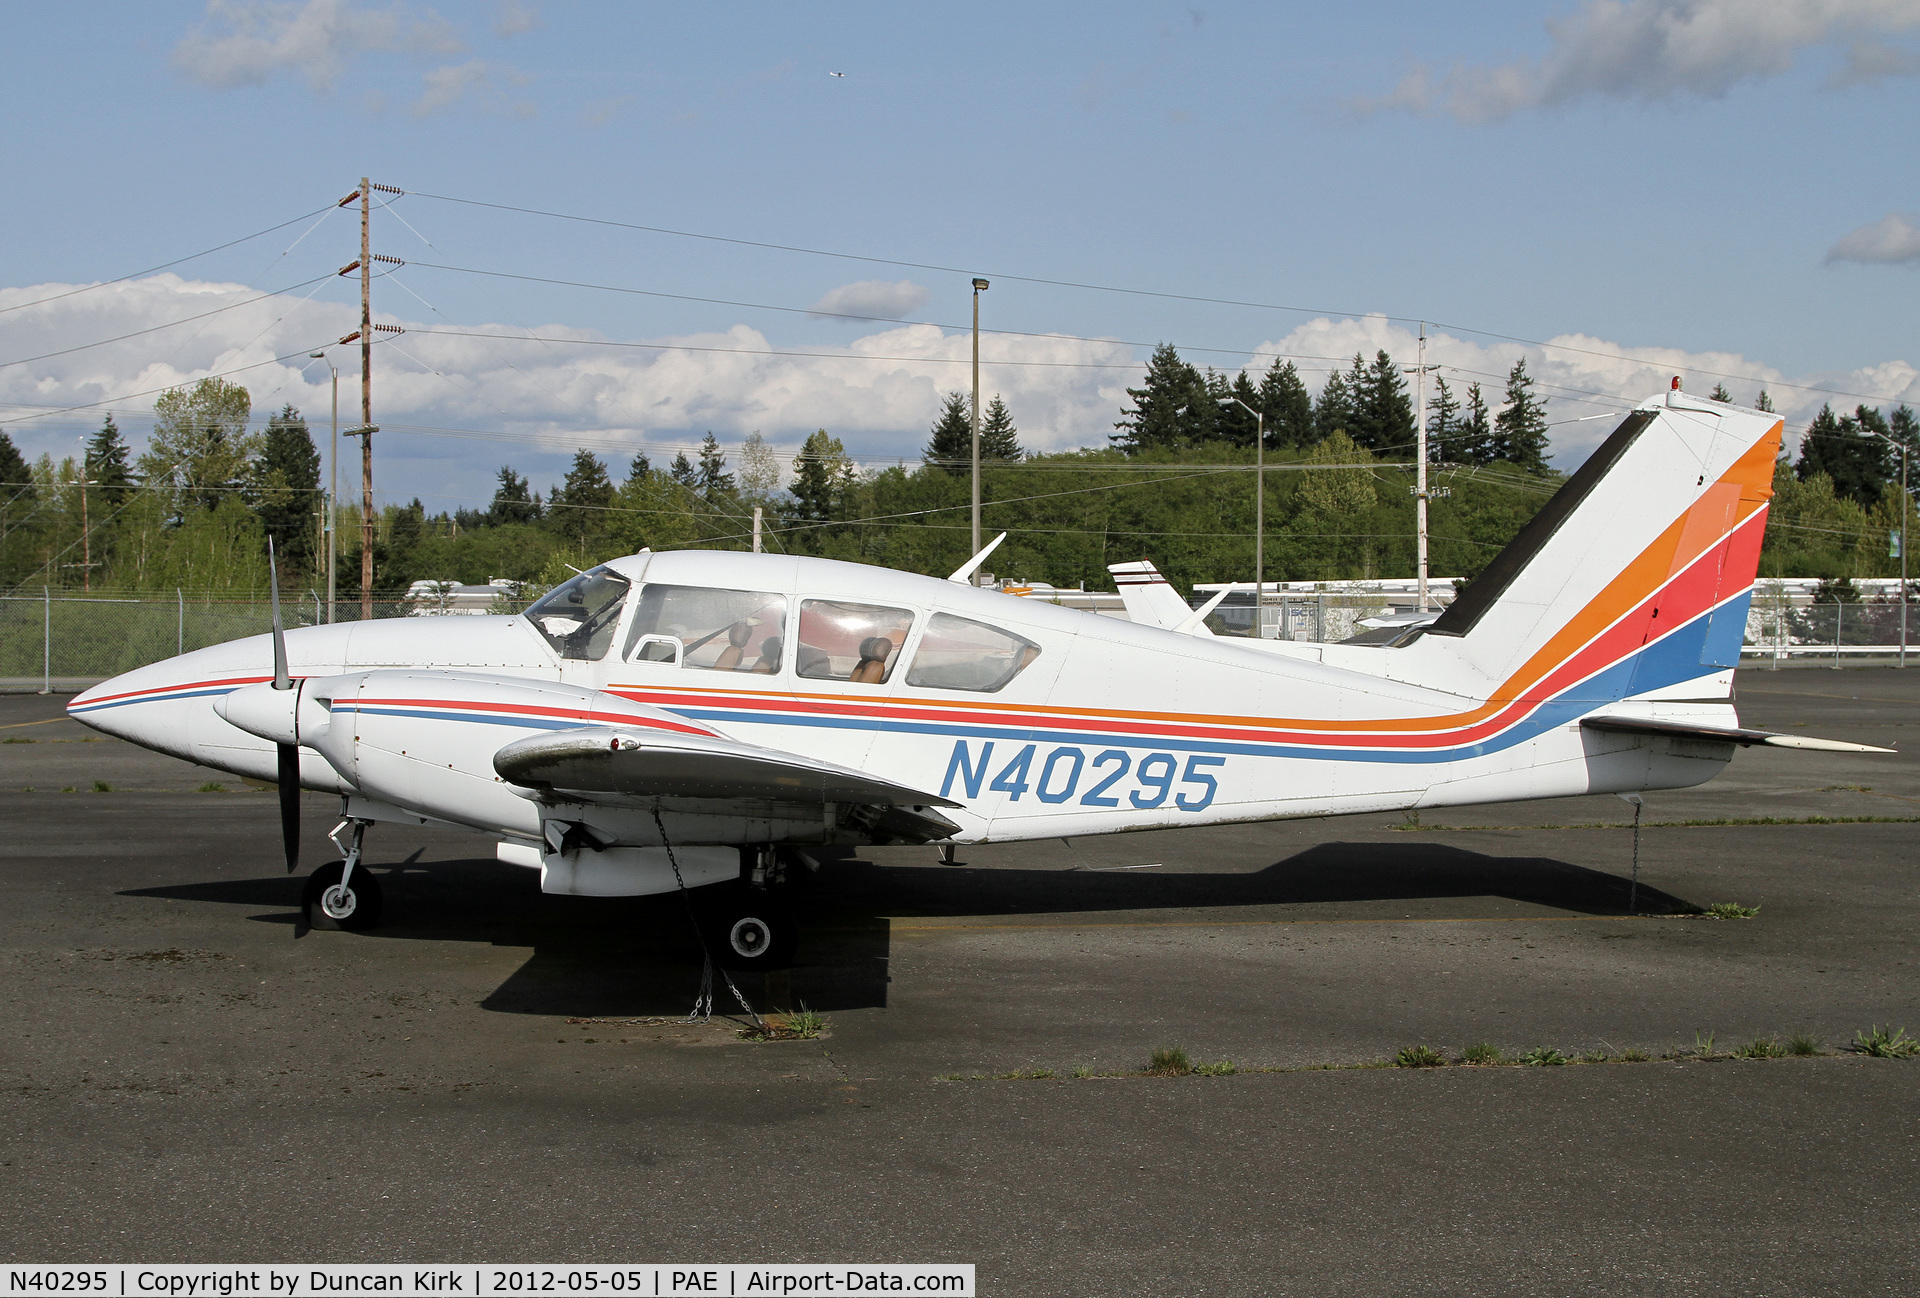 N40295, 1973 Piper PA-23-250 C/N 27-7305110, Flat tires are never a good sign.